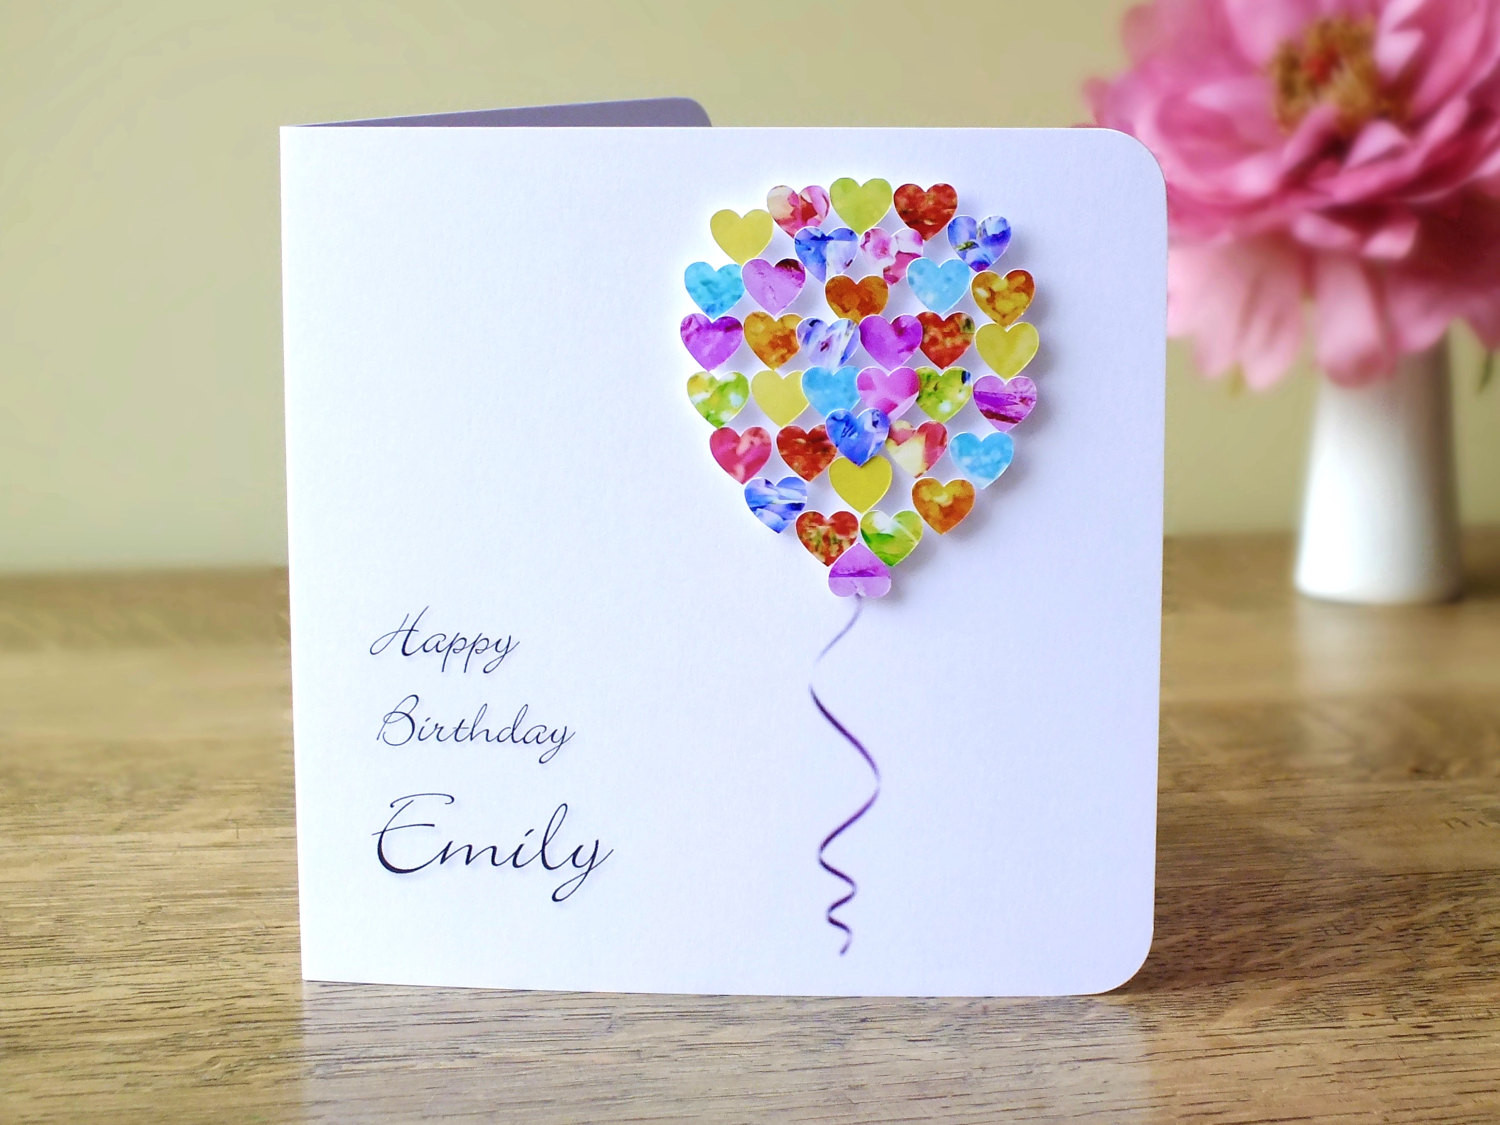 22-best-homemade-birthday-cards-for-dad-home-family-style-and-art-ideas